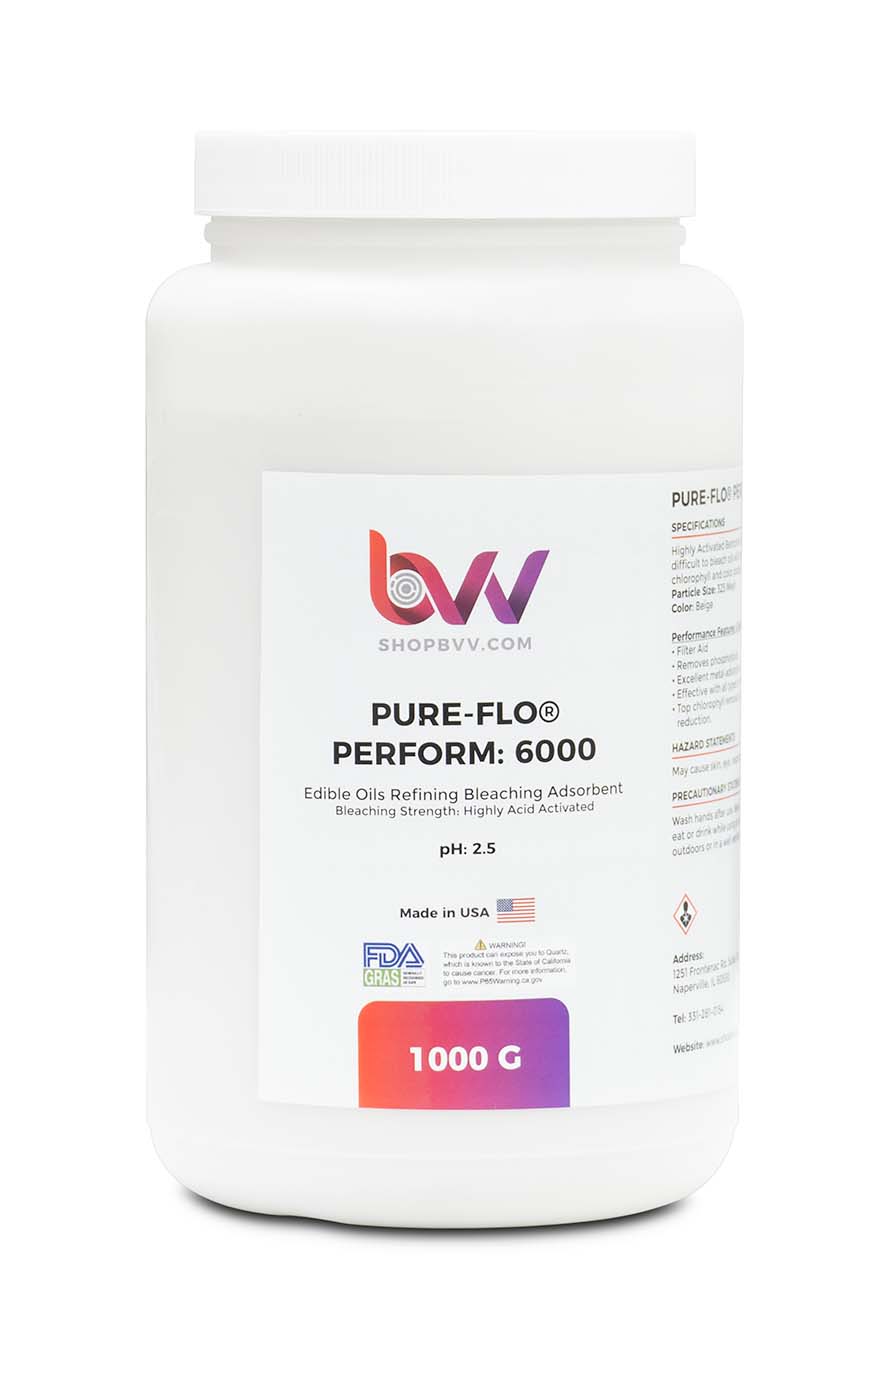 BVV Pure-Flo® Perform 6000 Highly Activated Bleaching & Decolorizing Bentonite for Edible Oils *FDA-GRAS